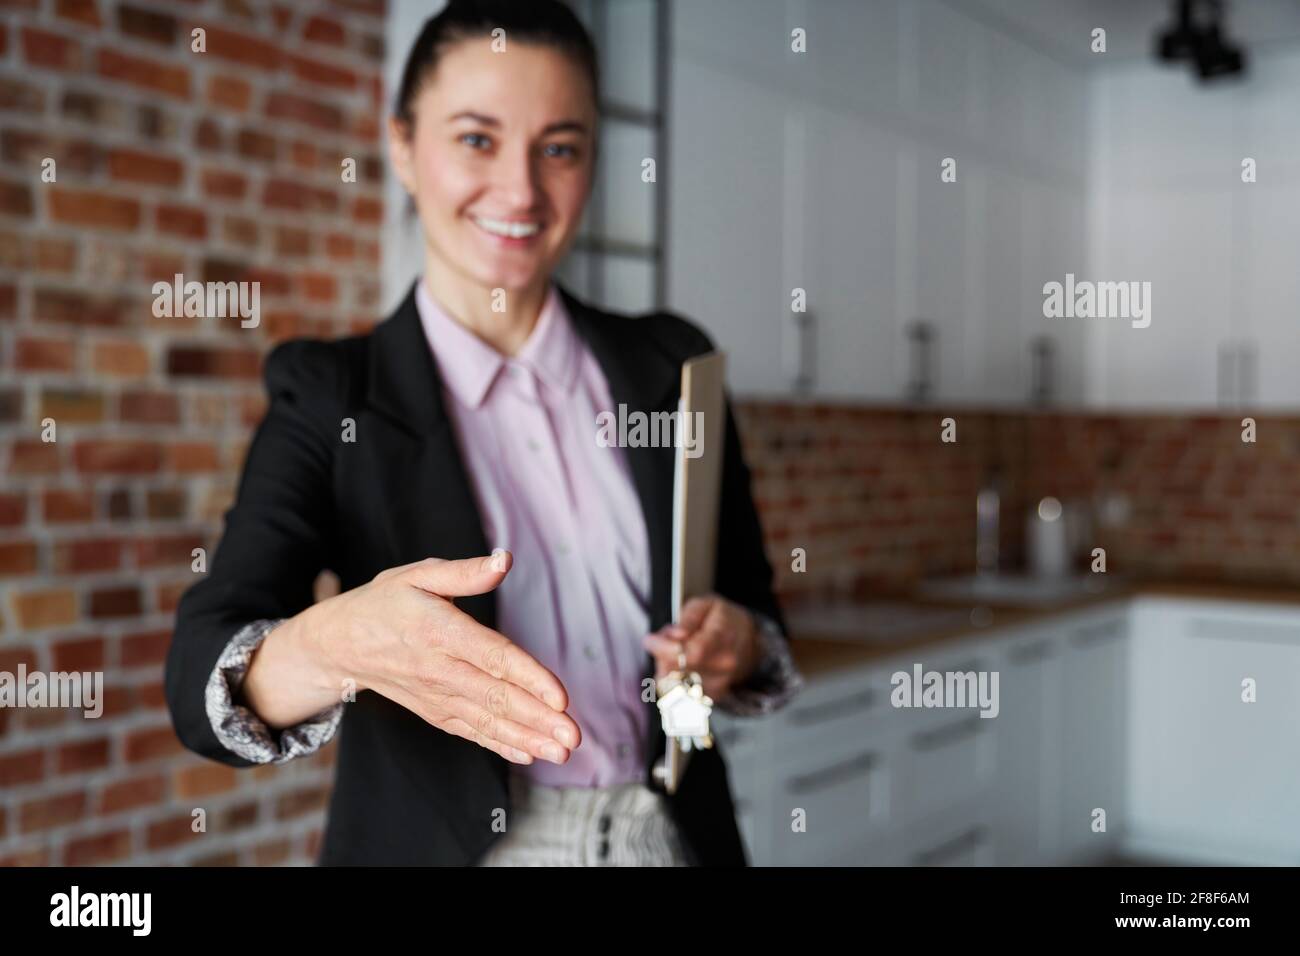 Real estate agent reaches out for a handshake Stock Photo